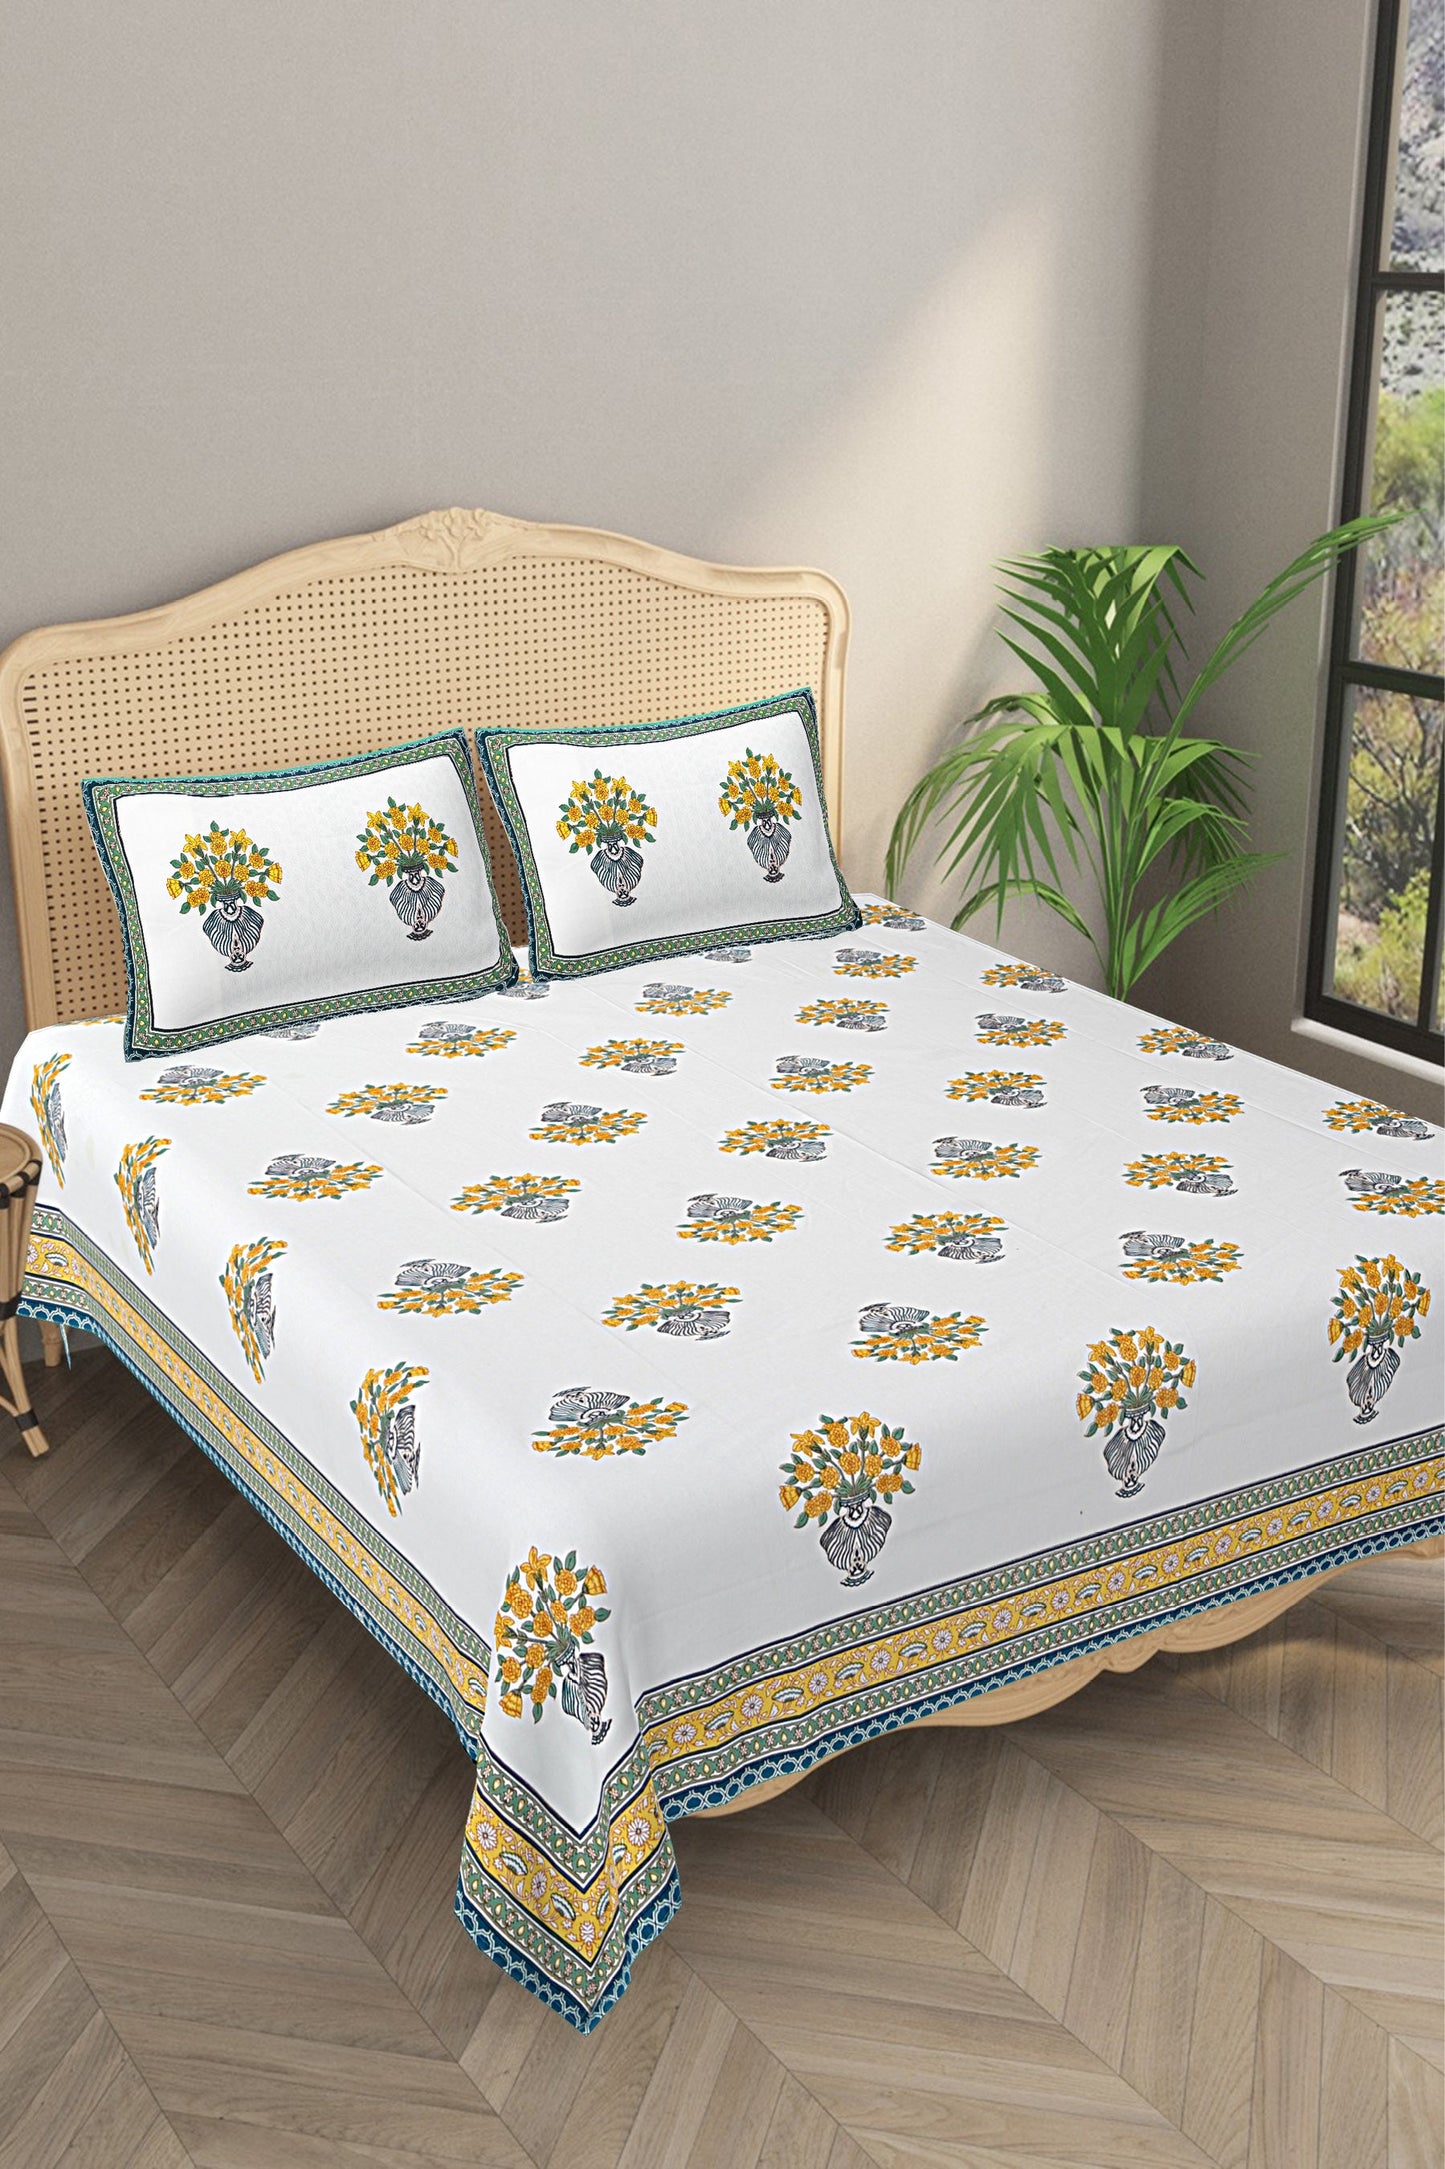 Ethnic Motifs - Designs from Mughal Gardens - Handcrafted Double Bed Sheet with 2 Pillow Covers - Gamla Green